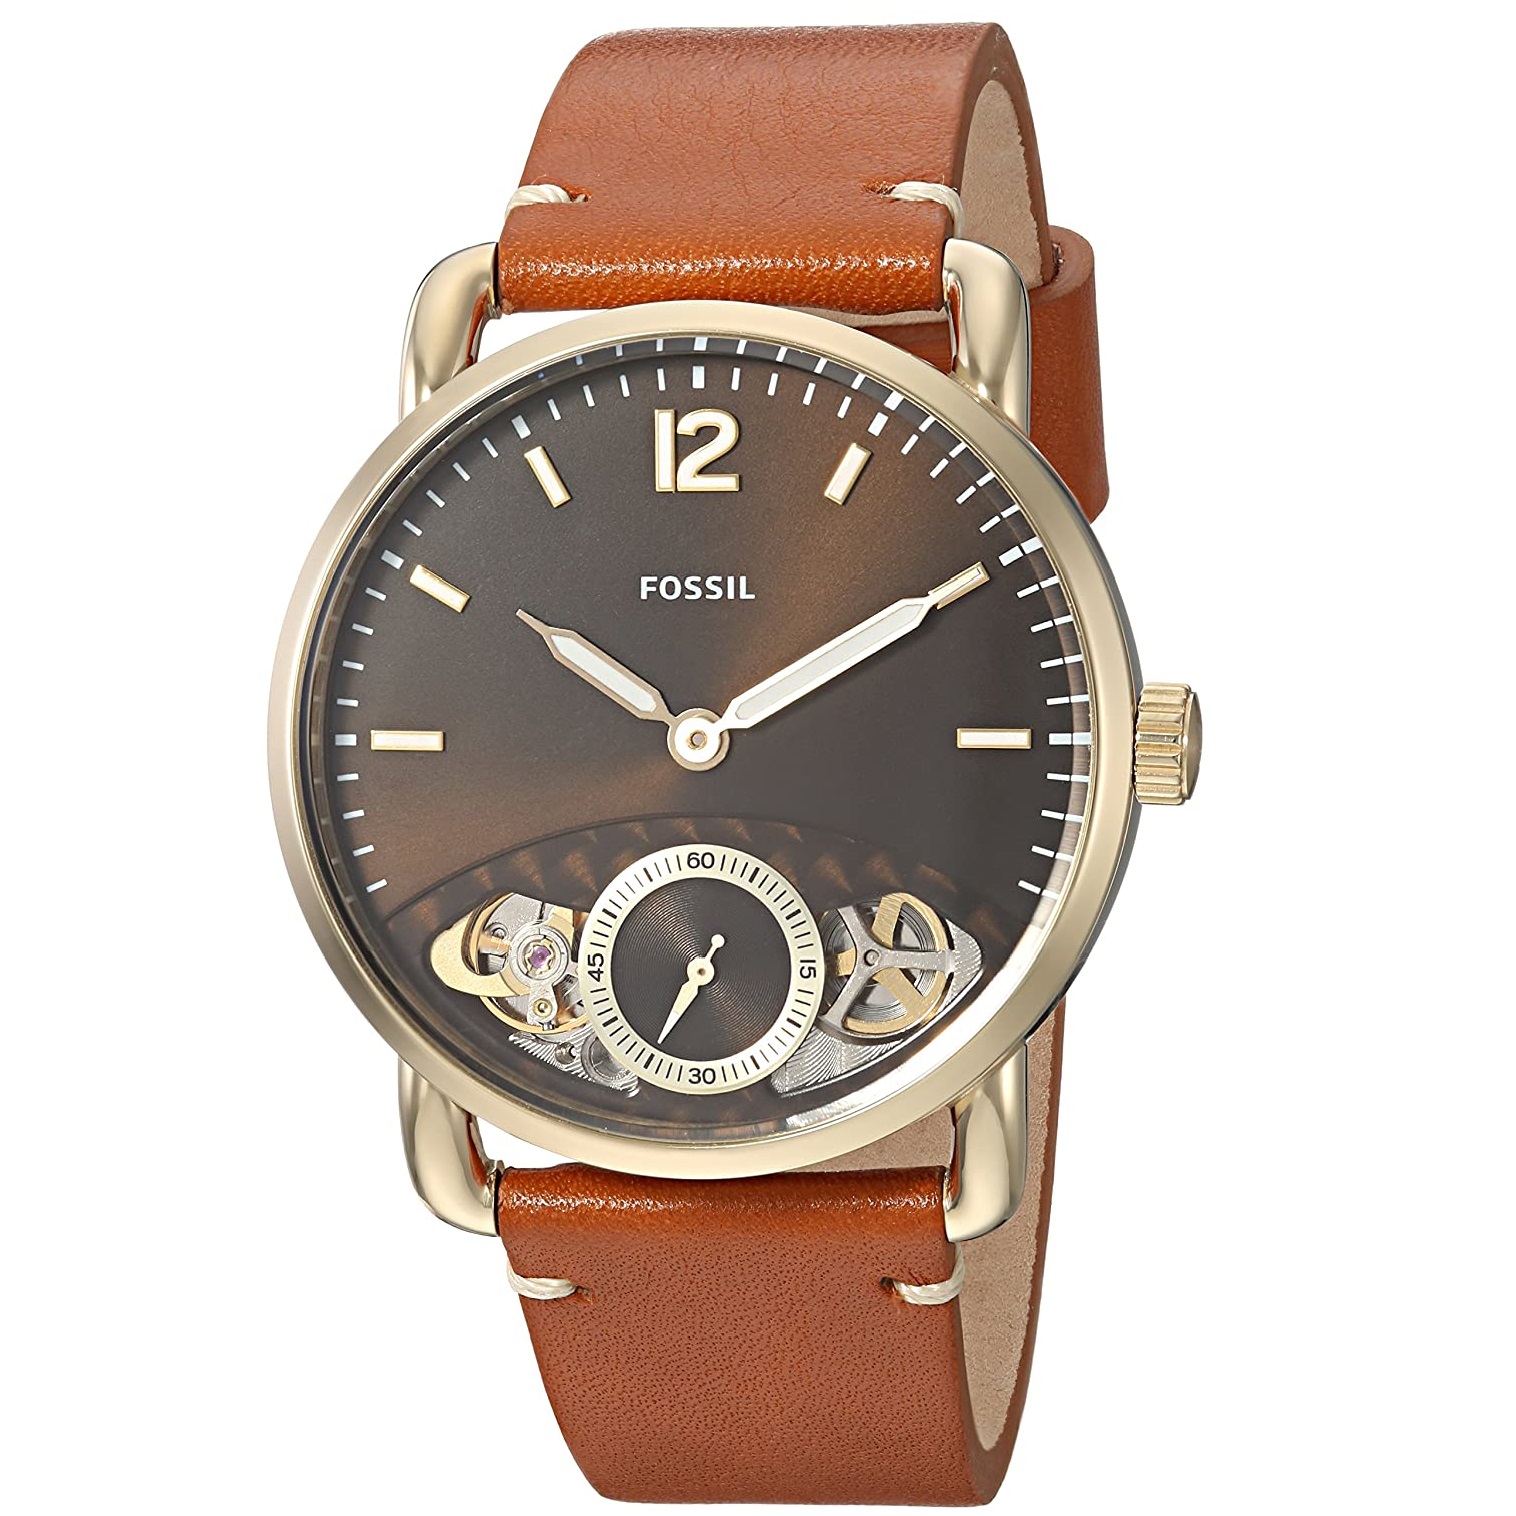 Fossil The Commuter Twist Brown Leather Watch ME1166